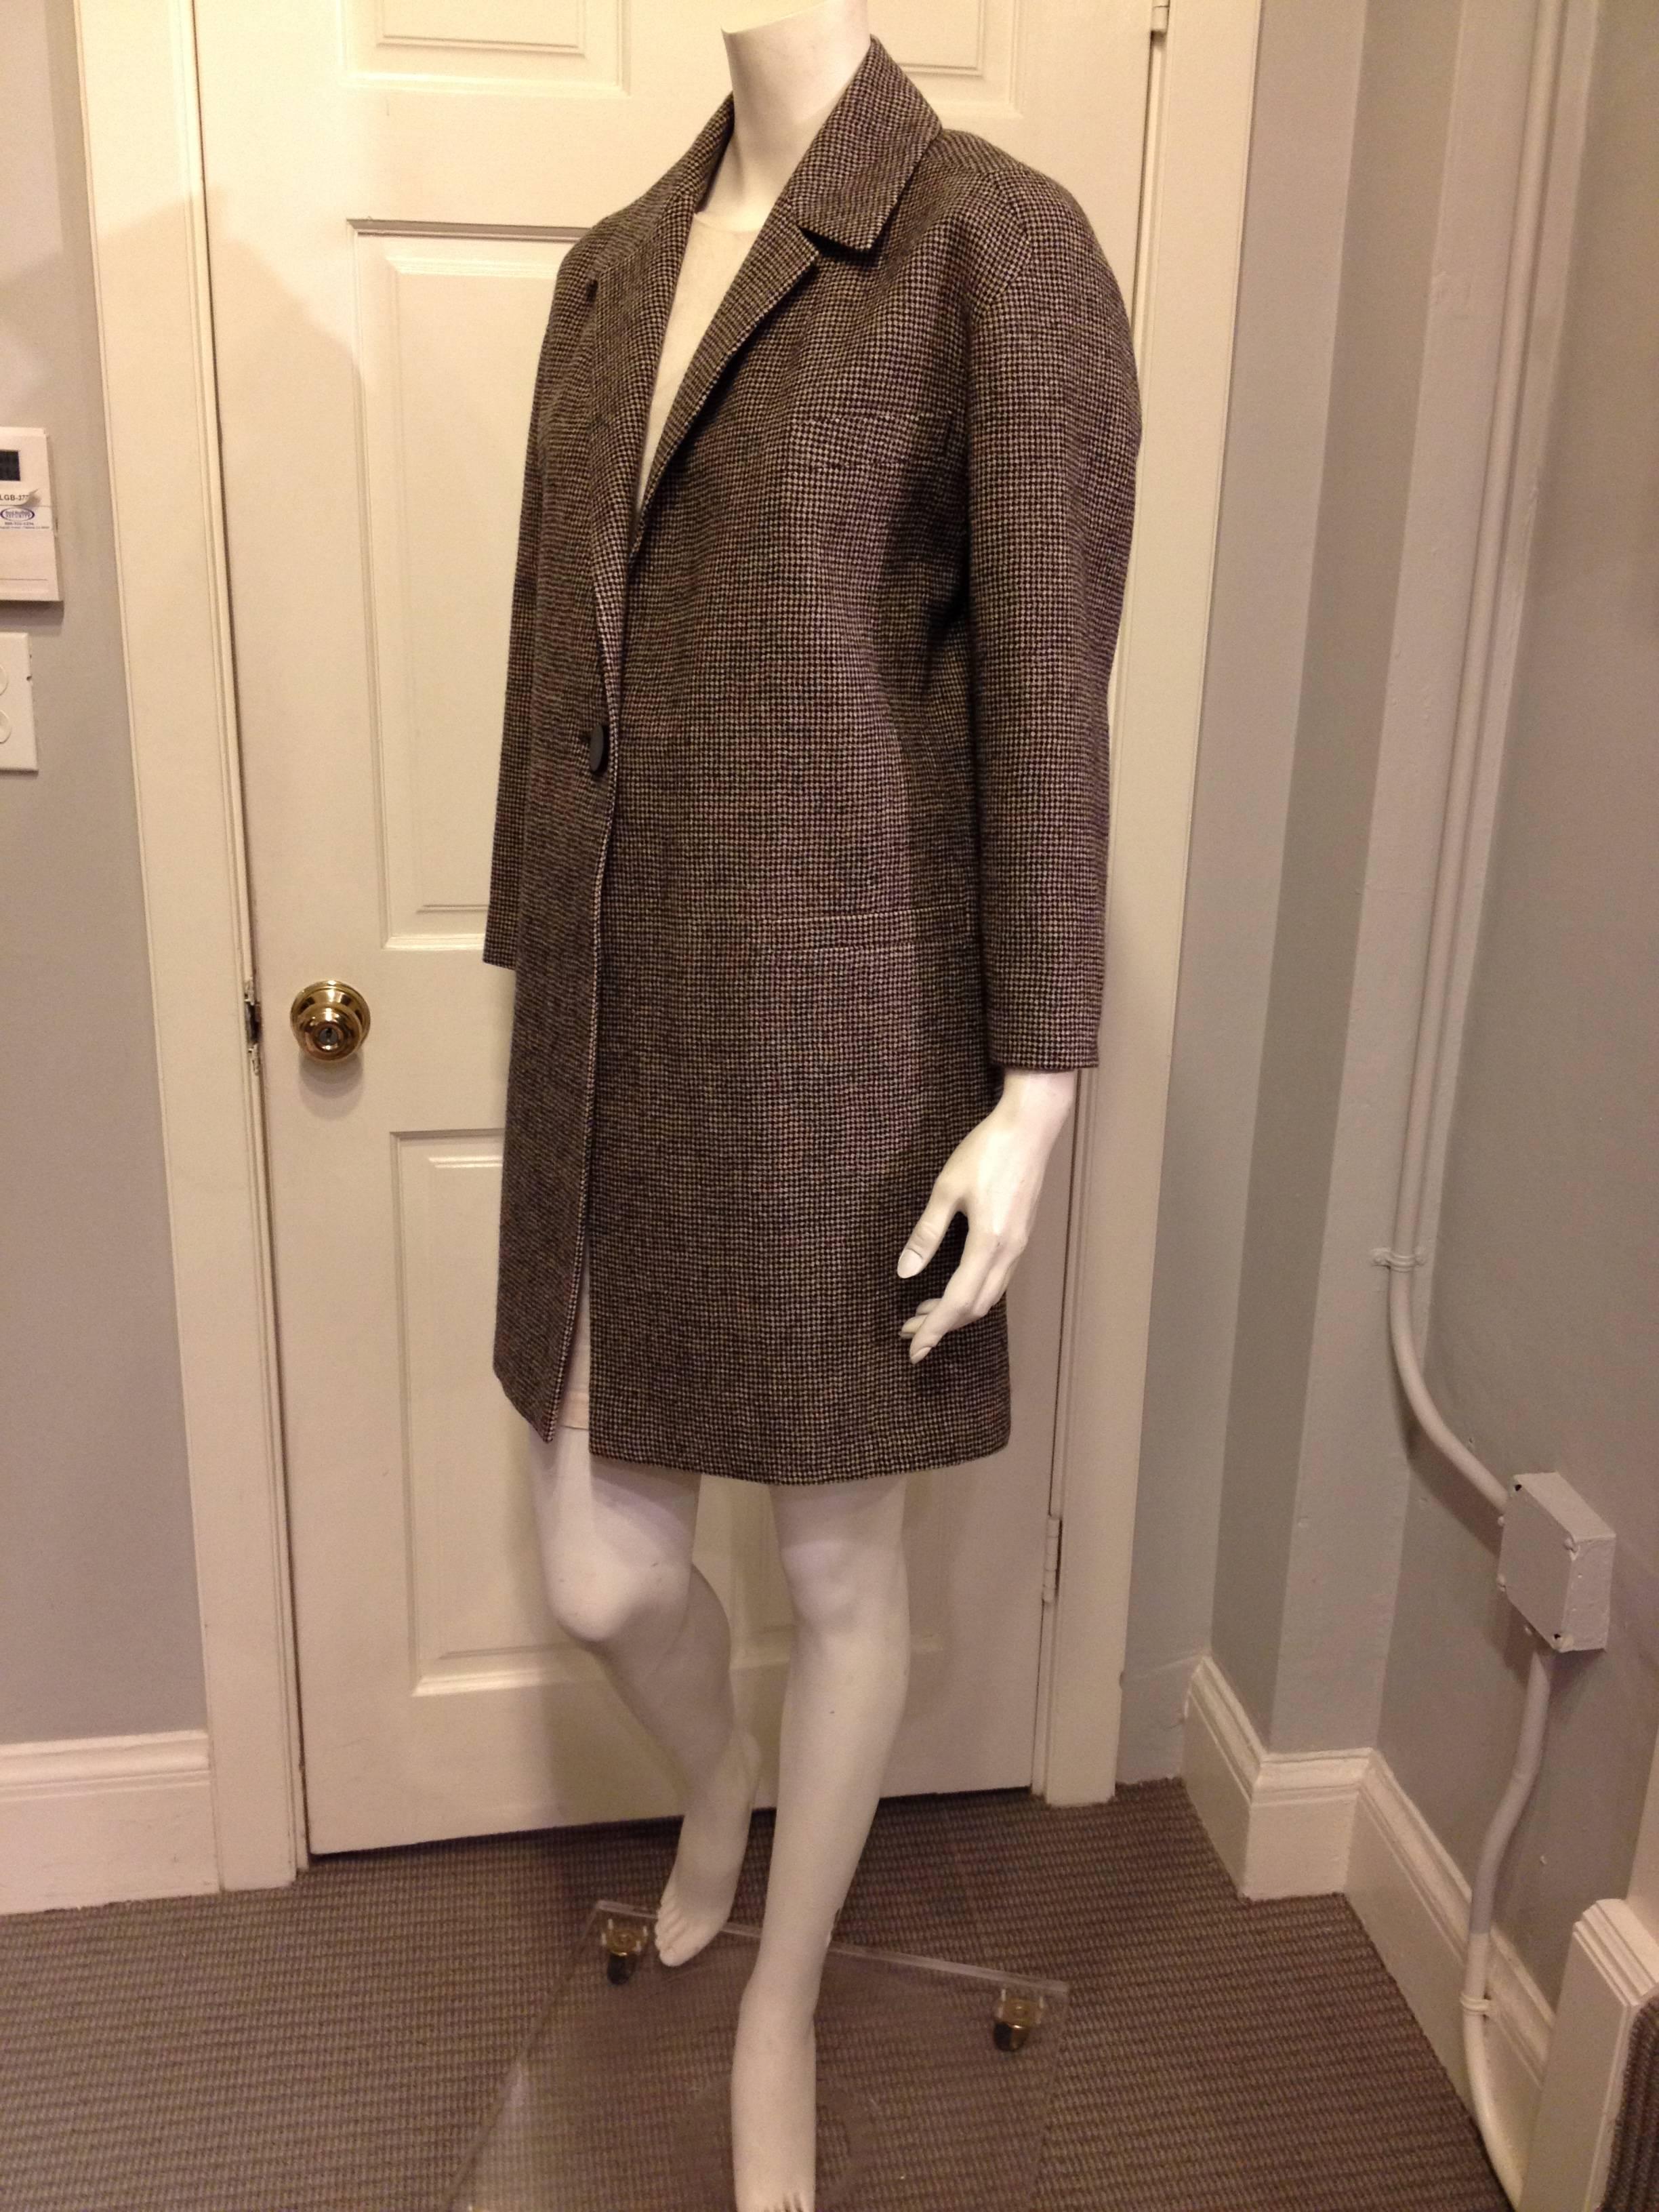 The classic 60s car coat is such an enduring and elegant style - cut wide with tailored shoulders and roomy sleeves, it's the perfect outer layer. The masculine suiting material is gorgeous, a small scale houndstooth of black on mushroom brown to